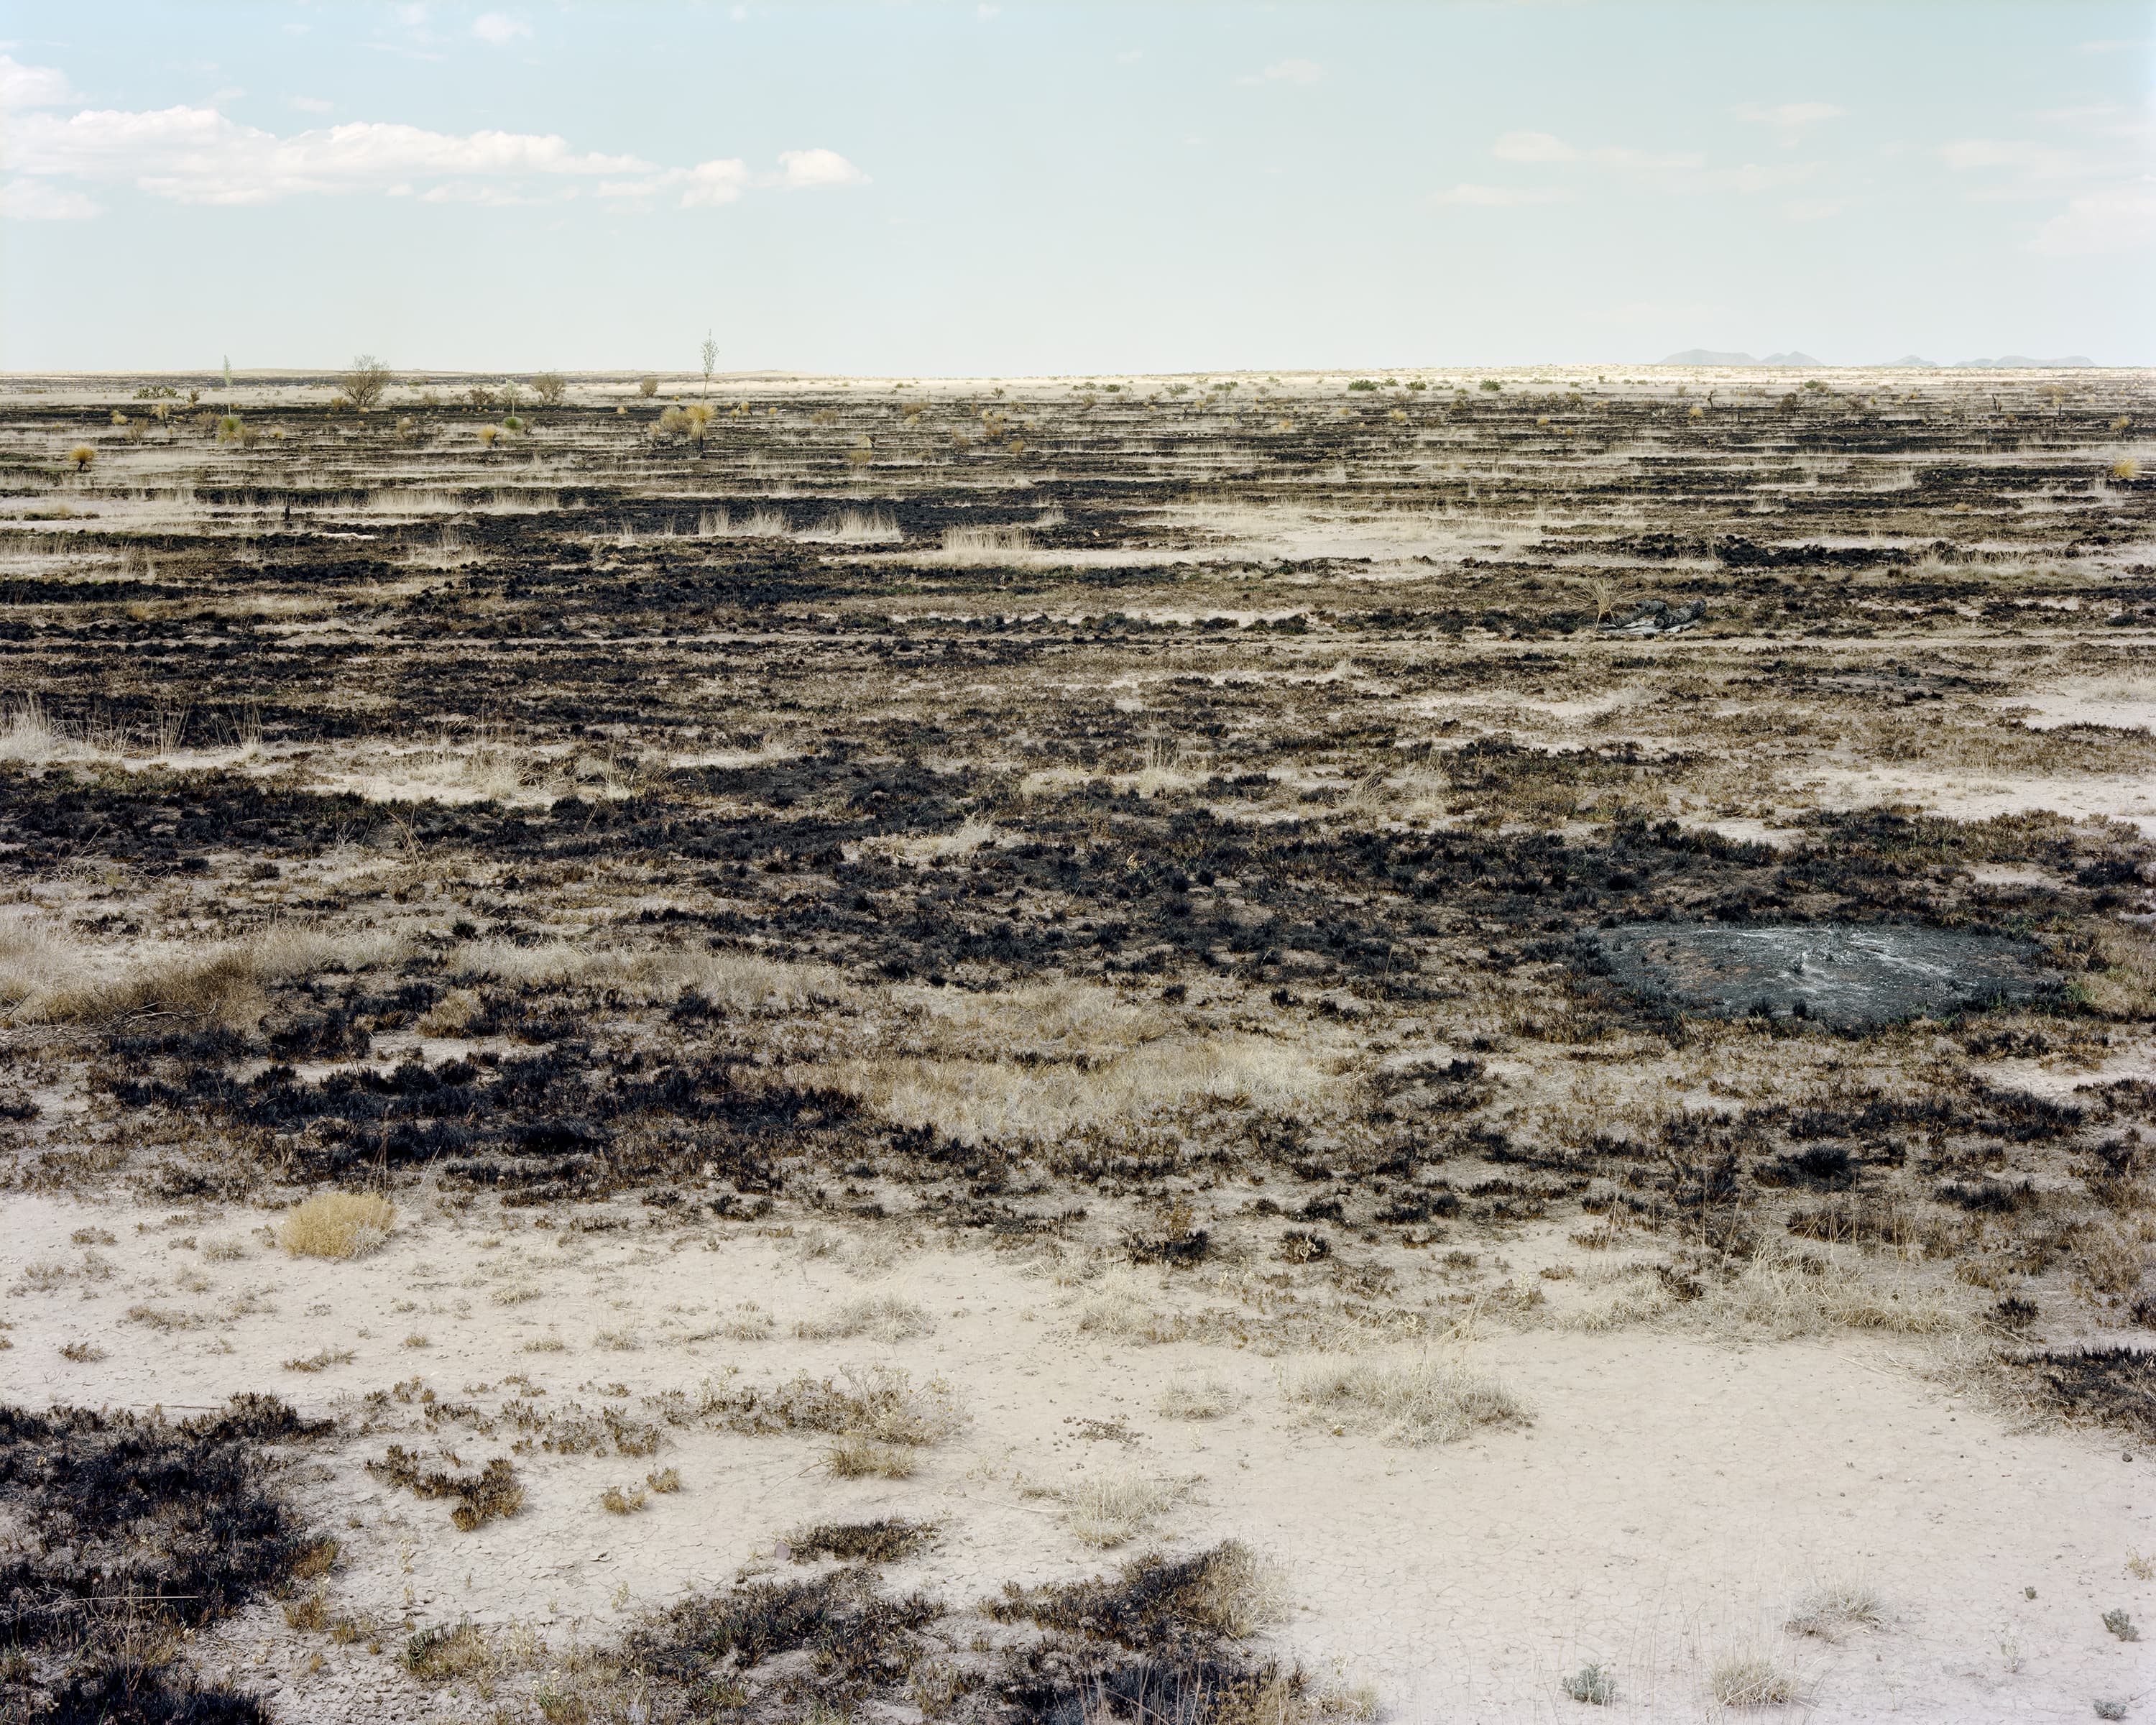 The burnt landscape of field damaged by brushfire from a lightning strike. Melted plastic cattle trough on the right of the picture.